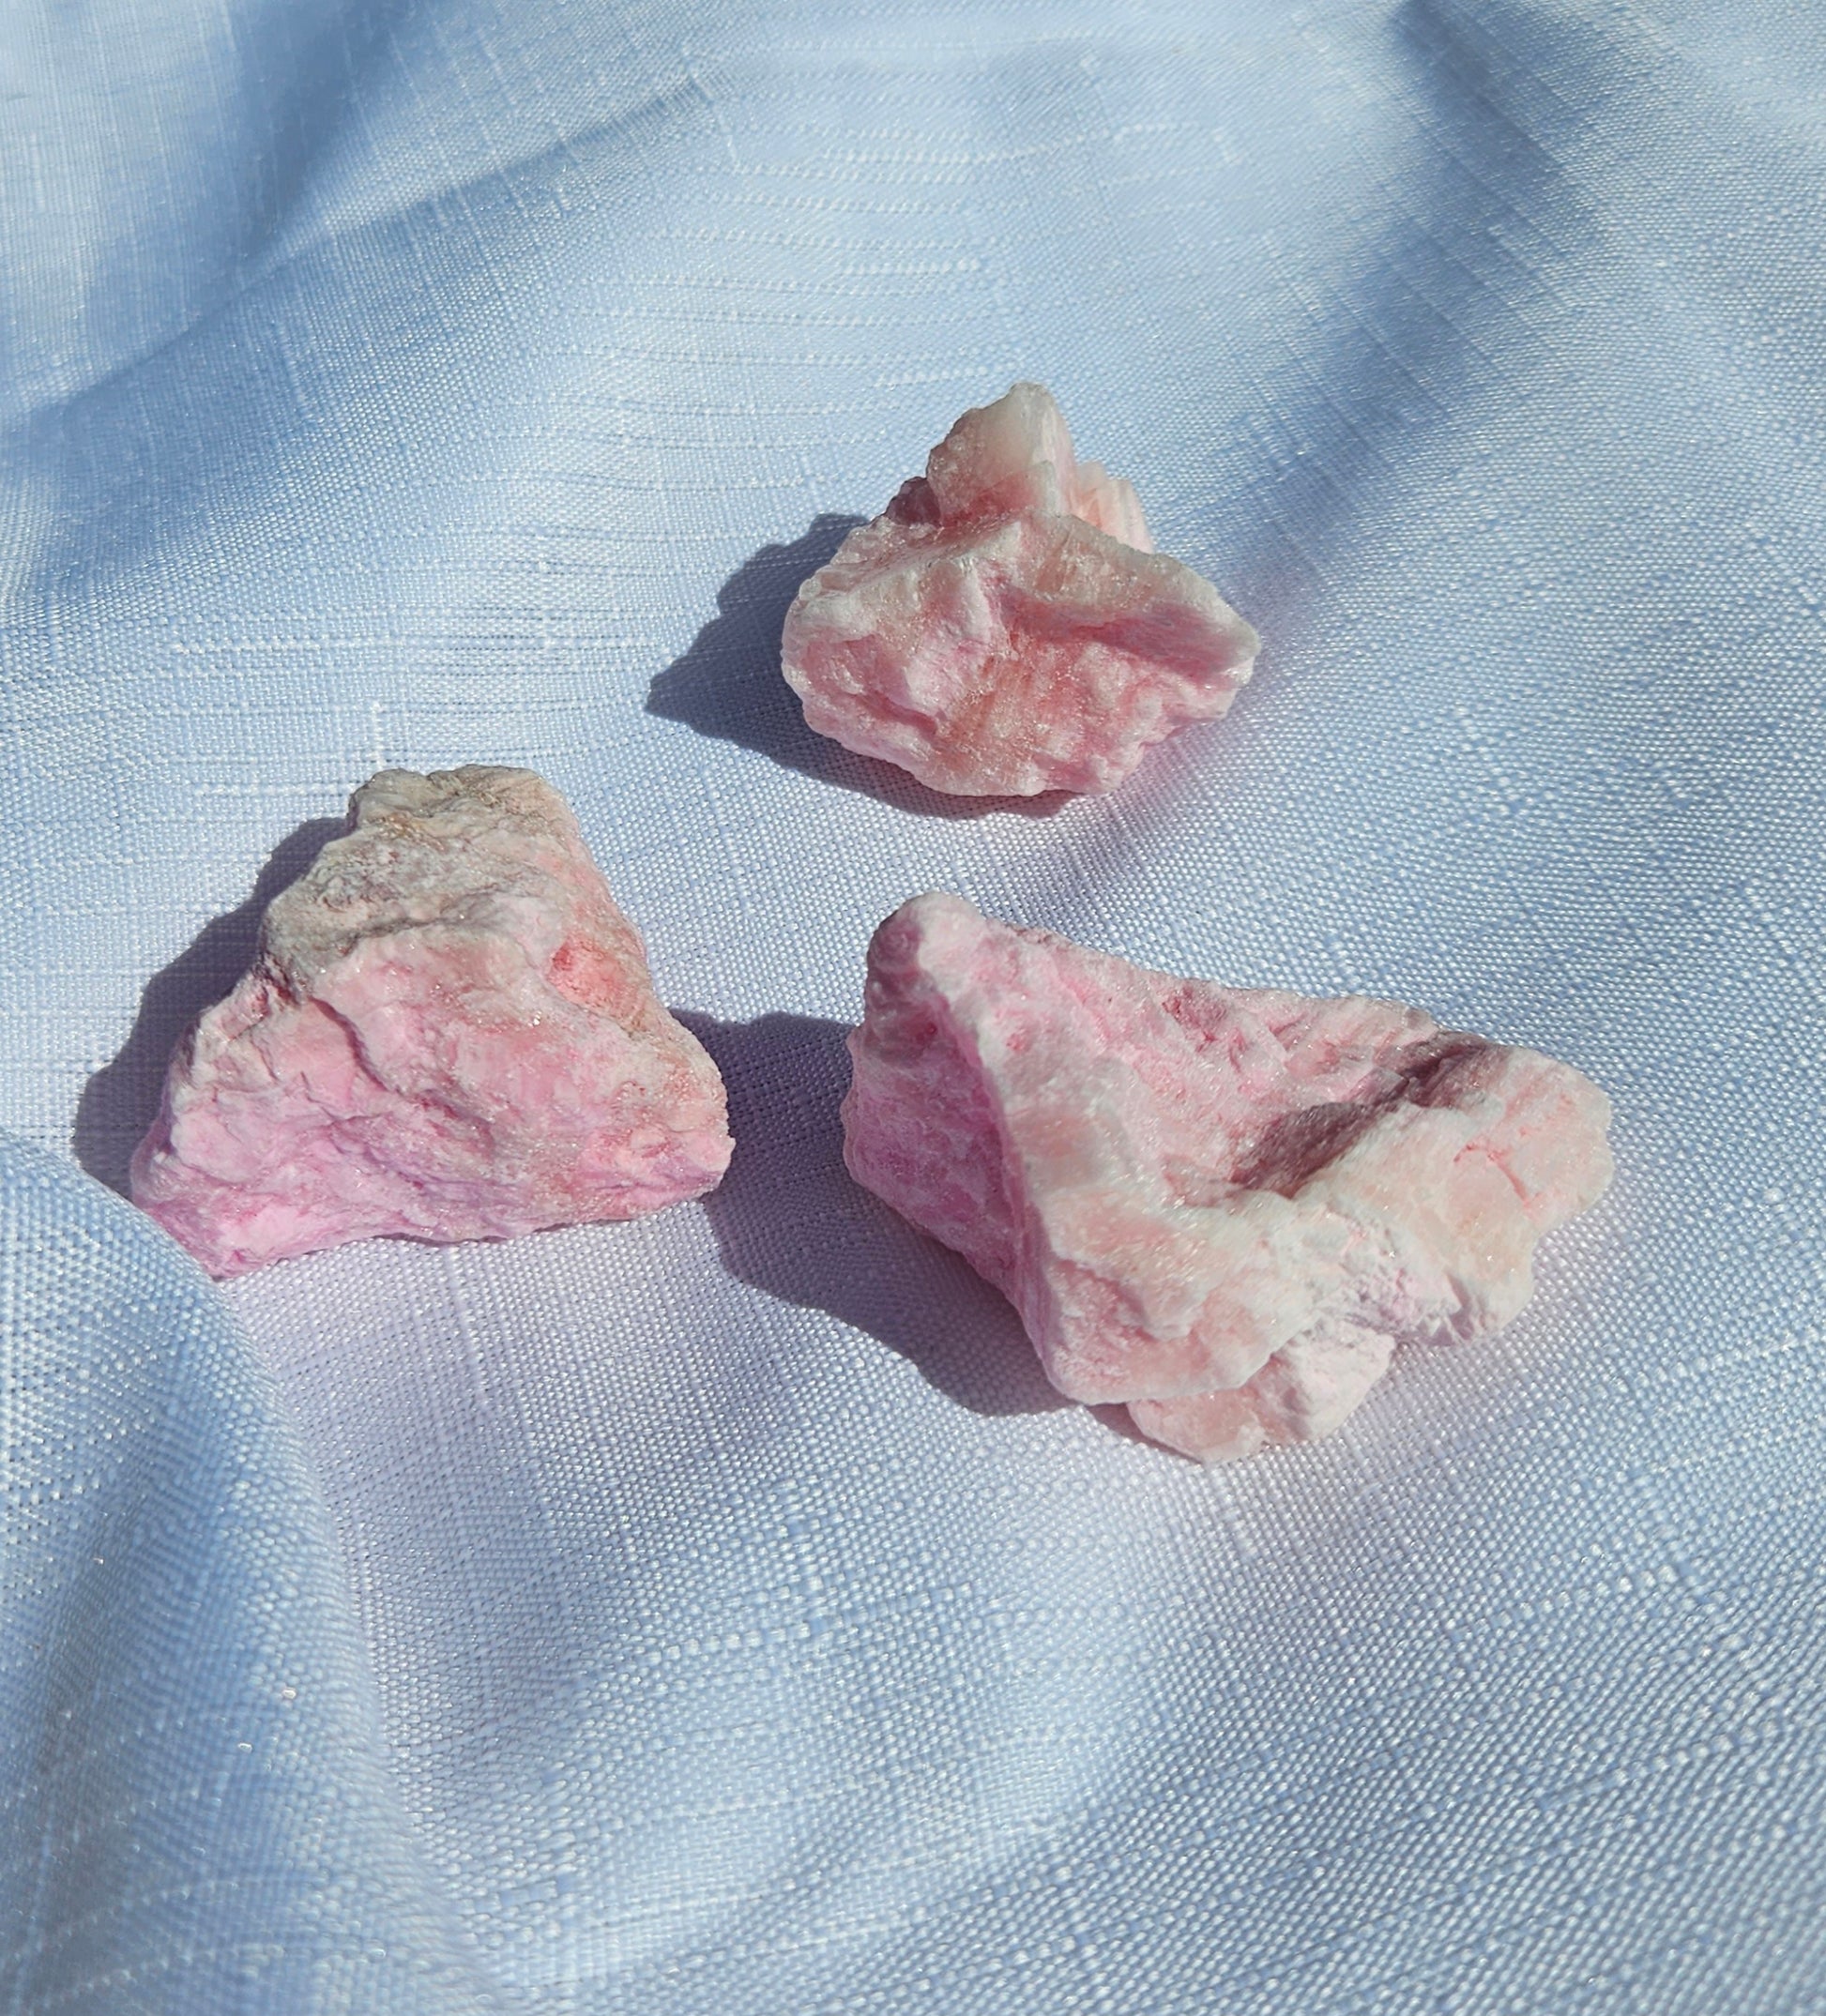 crystals for love, pink healing crystals sold at Mind Soul Sync crystal shop in Sydney.